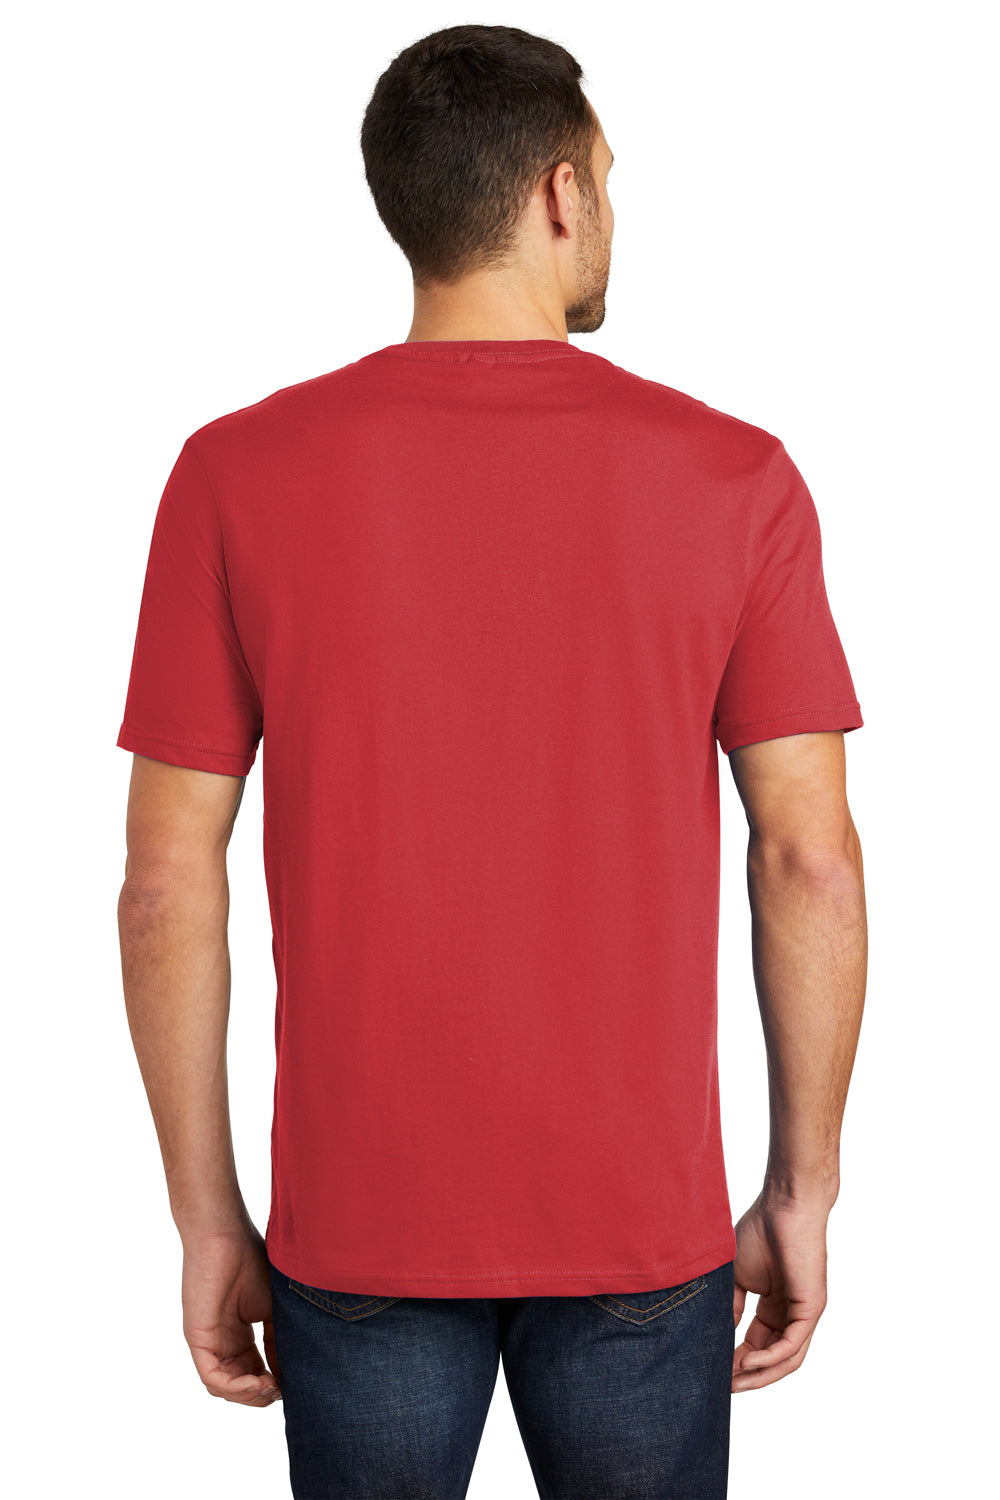 District DT104 Mens Perfect Weight Short Sleeve Crewneck T-Shirt Red Back